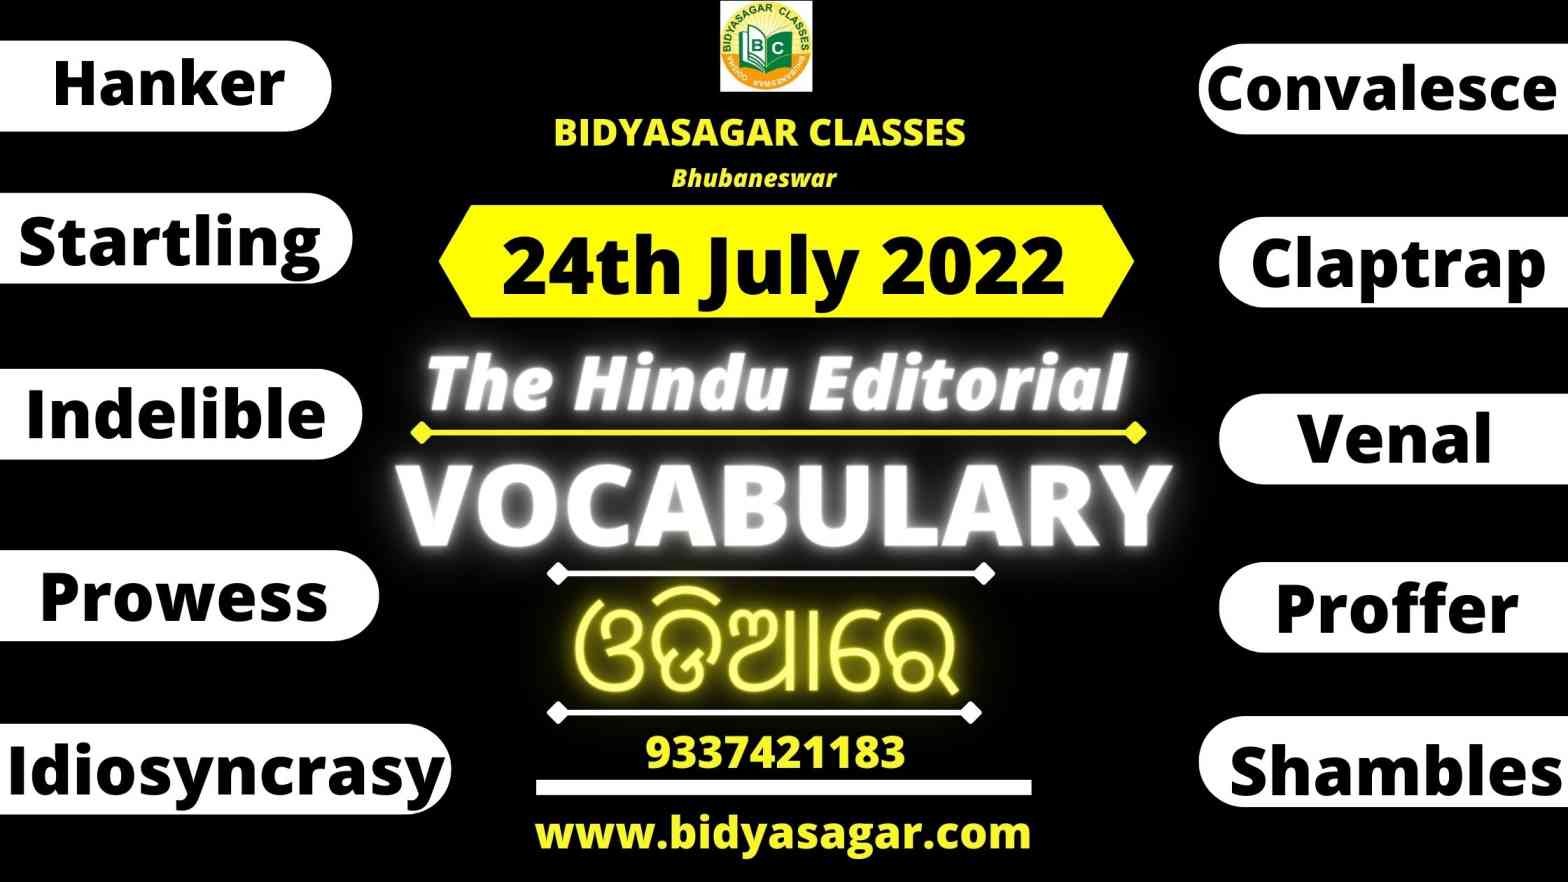 The Hindu Editorial Vocabulary of 24th July 2022